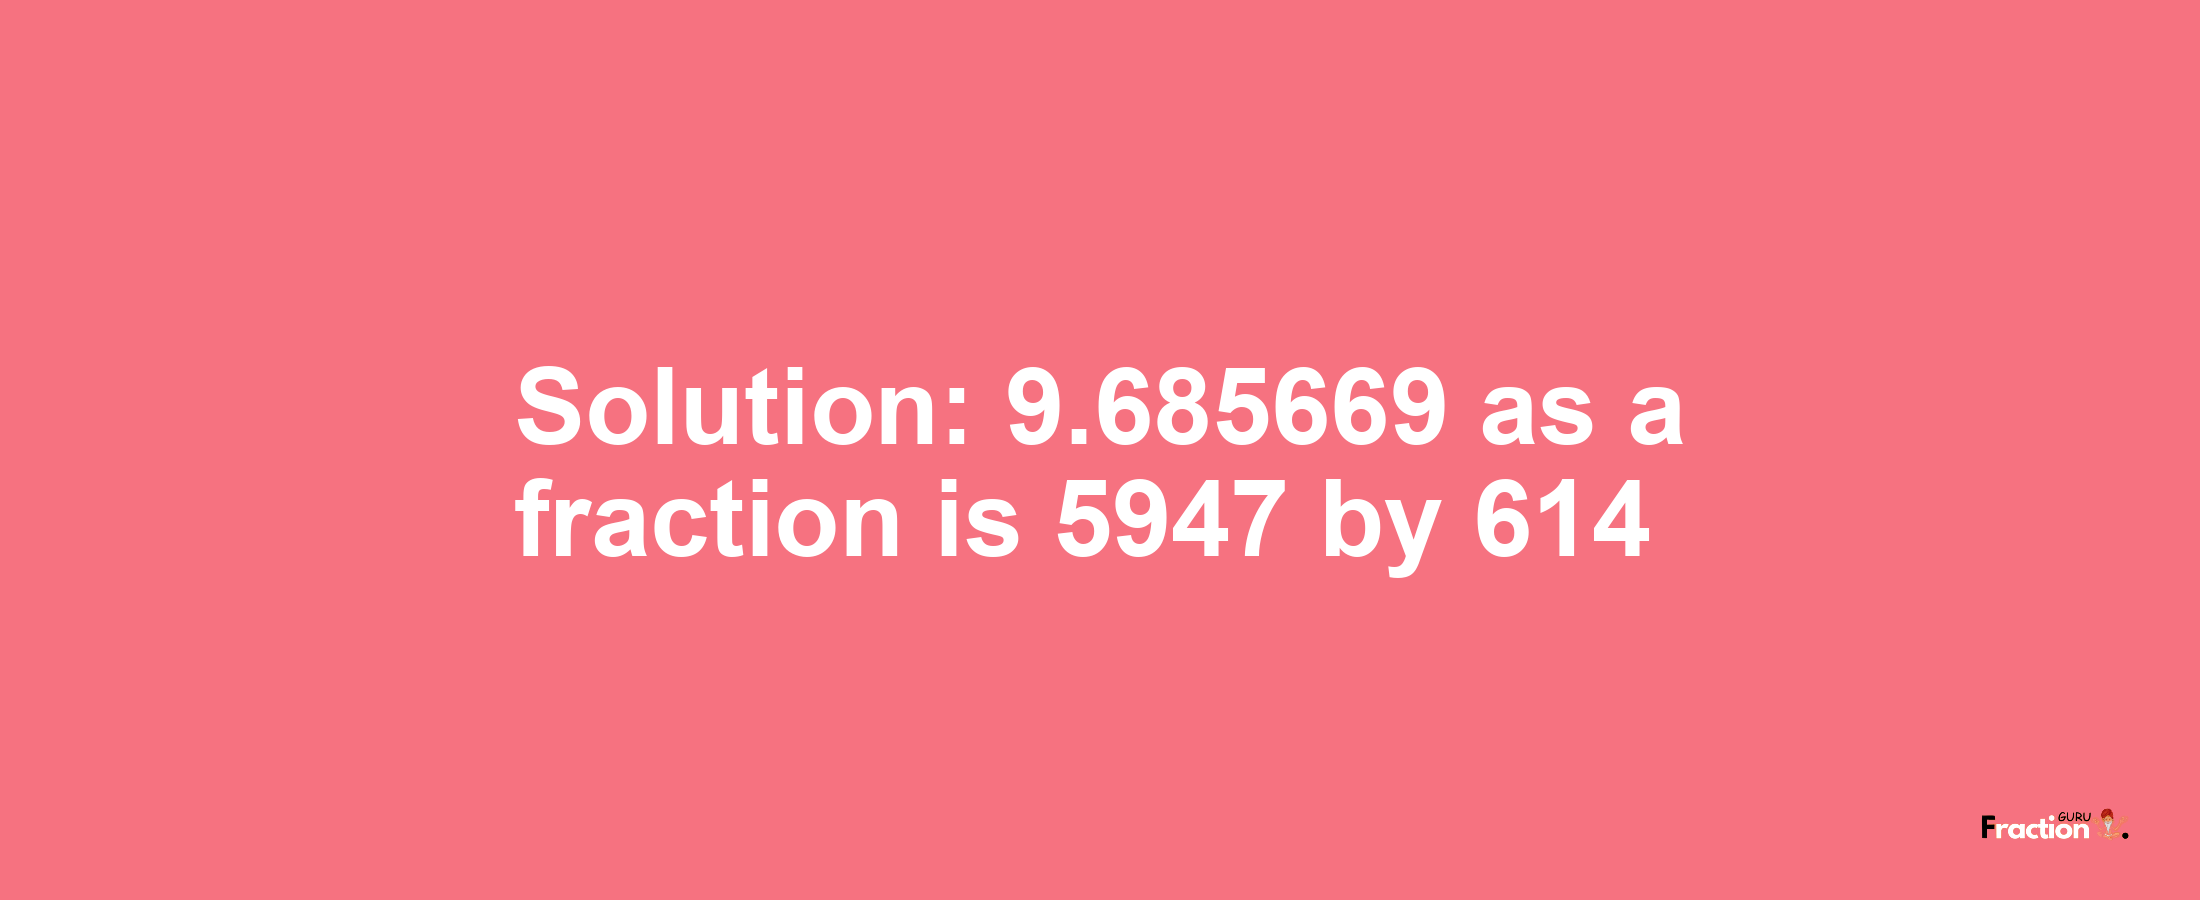 Solution:9.685669 as a fraction is 5947/614